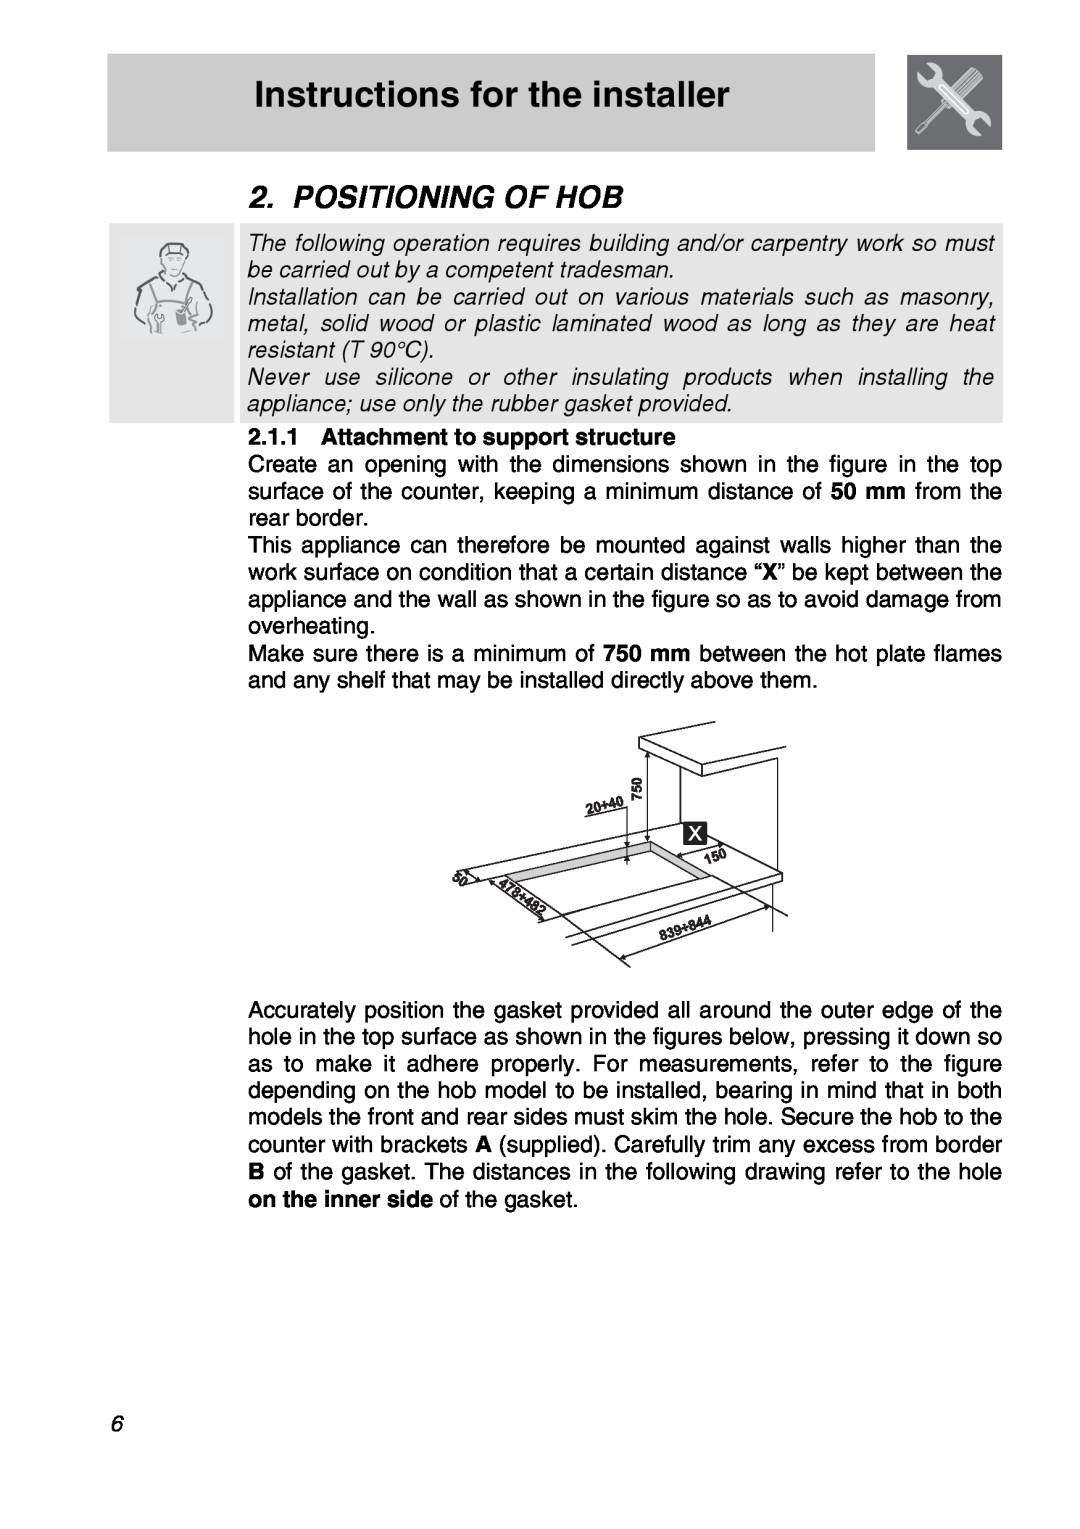 Smeg CIR597X5 manual Instructions for the installer, Positioning Of Hob, Attachment to support structure 